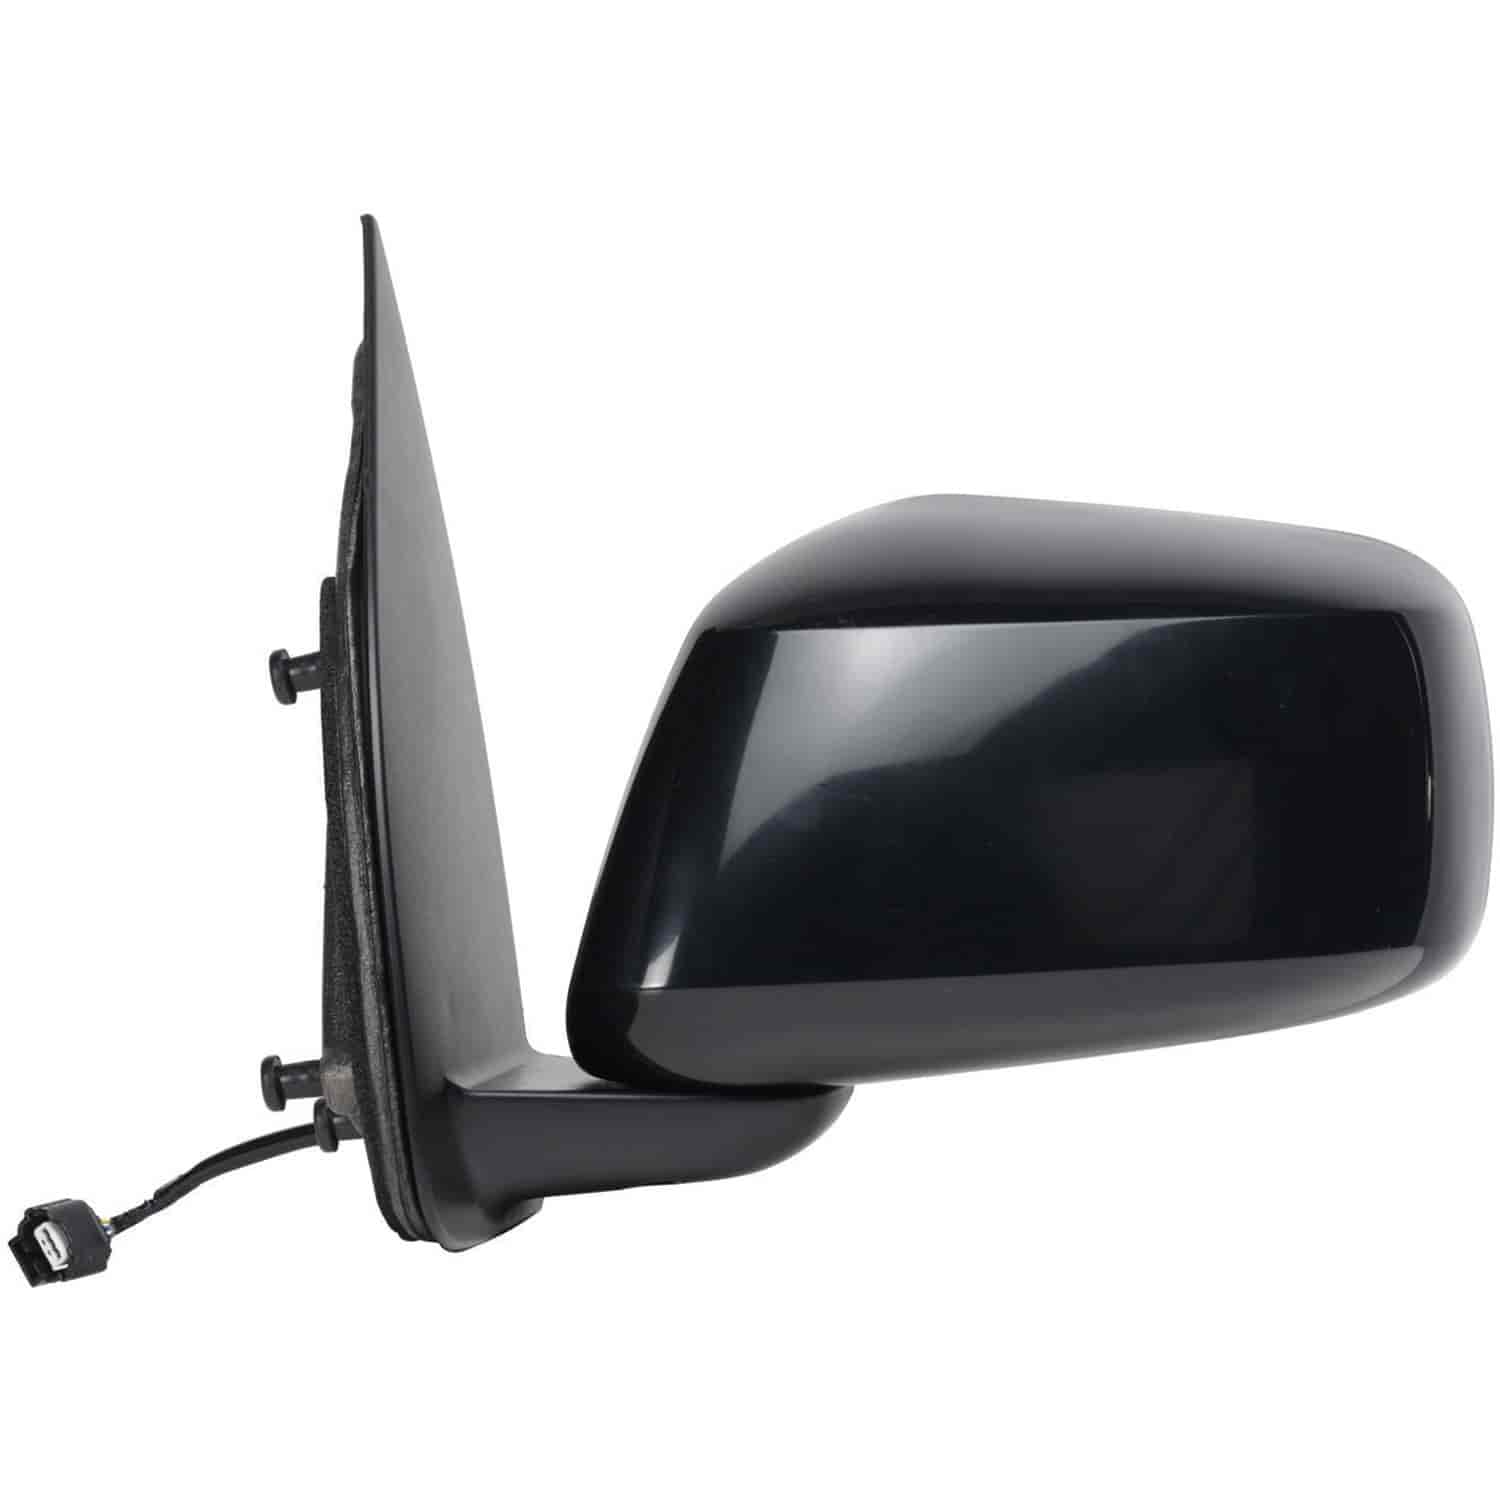 OEM Style Replacement mirror for 05-14 Nissan Frontier